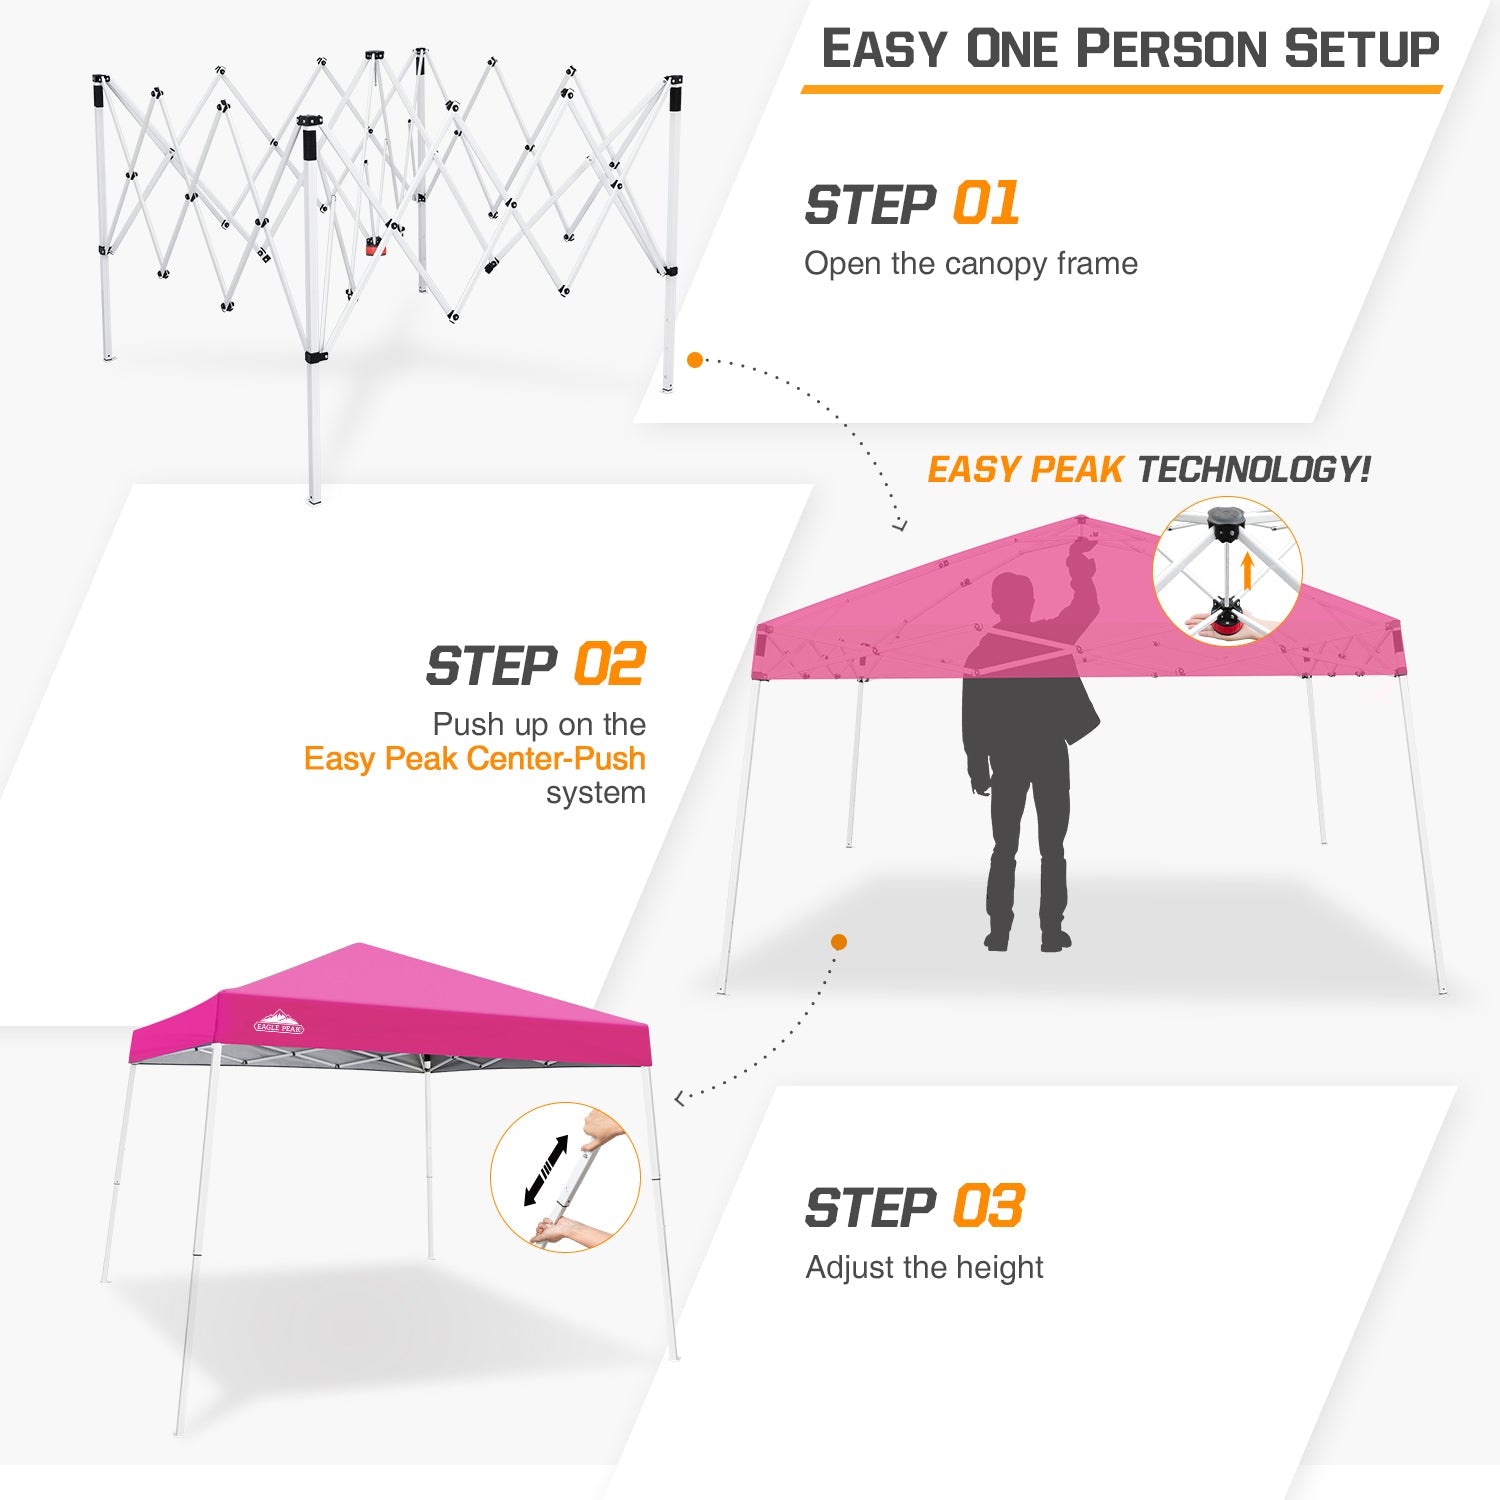 EAGLE PEAK 10' x 10' Slant Leg Pop-up Canopy Tent Easy One Person Setup Instant Outdoor Canopy Folding Shelter with 64 Square Feet of Shade (Pink)